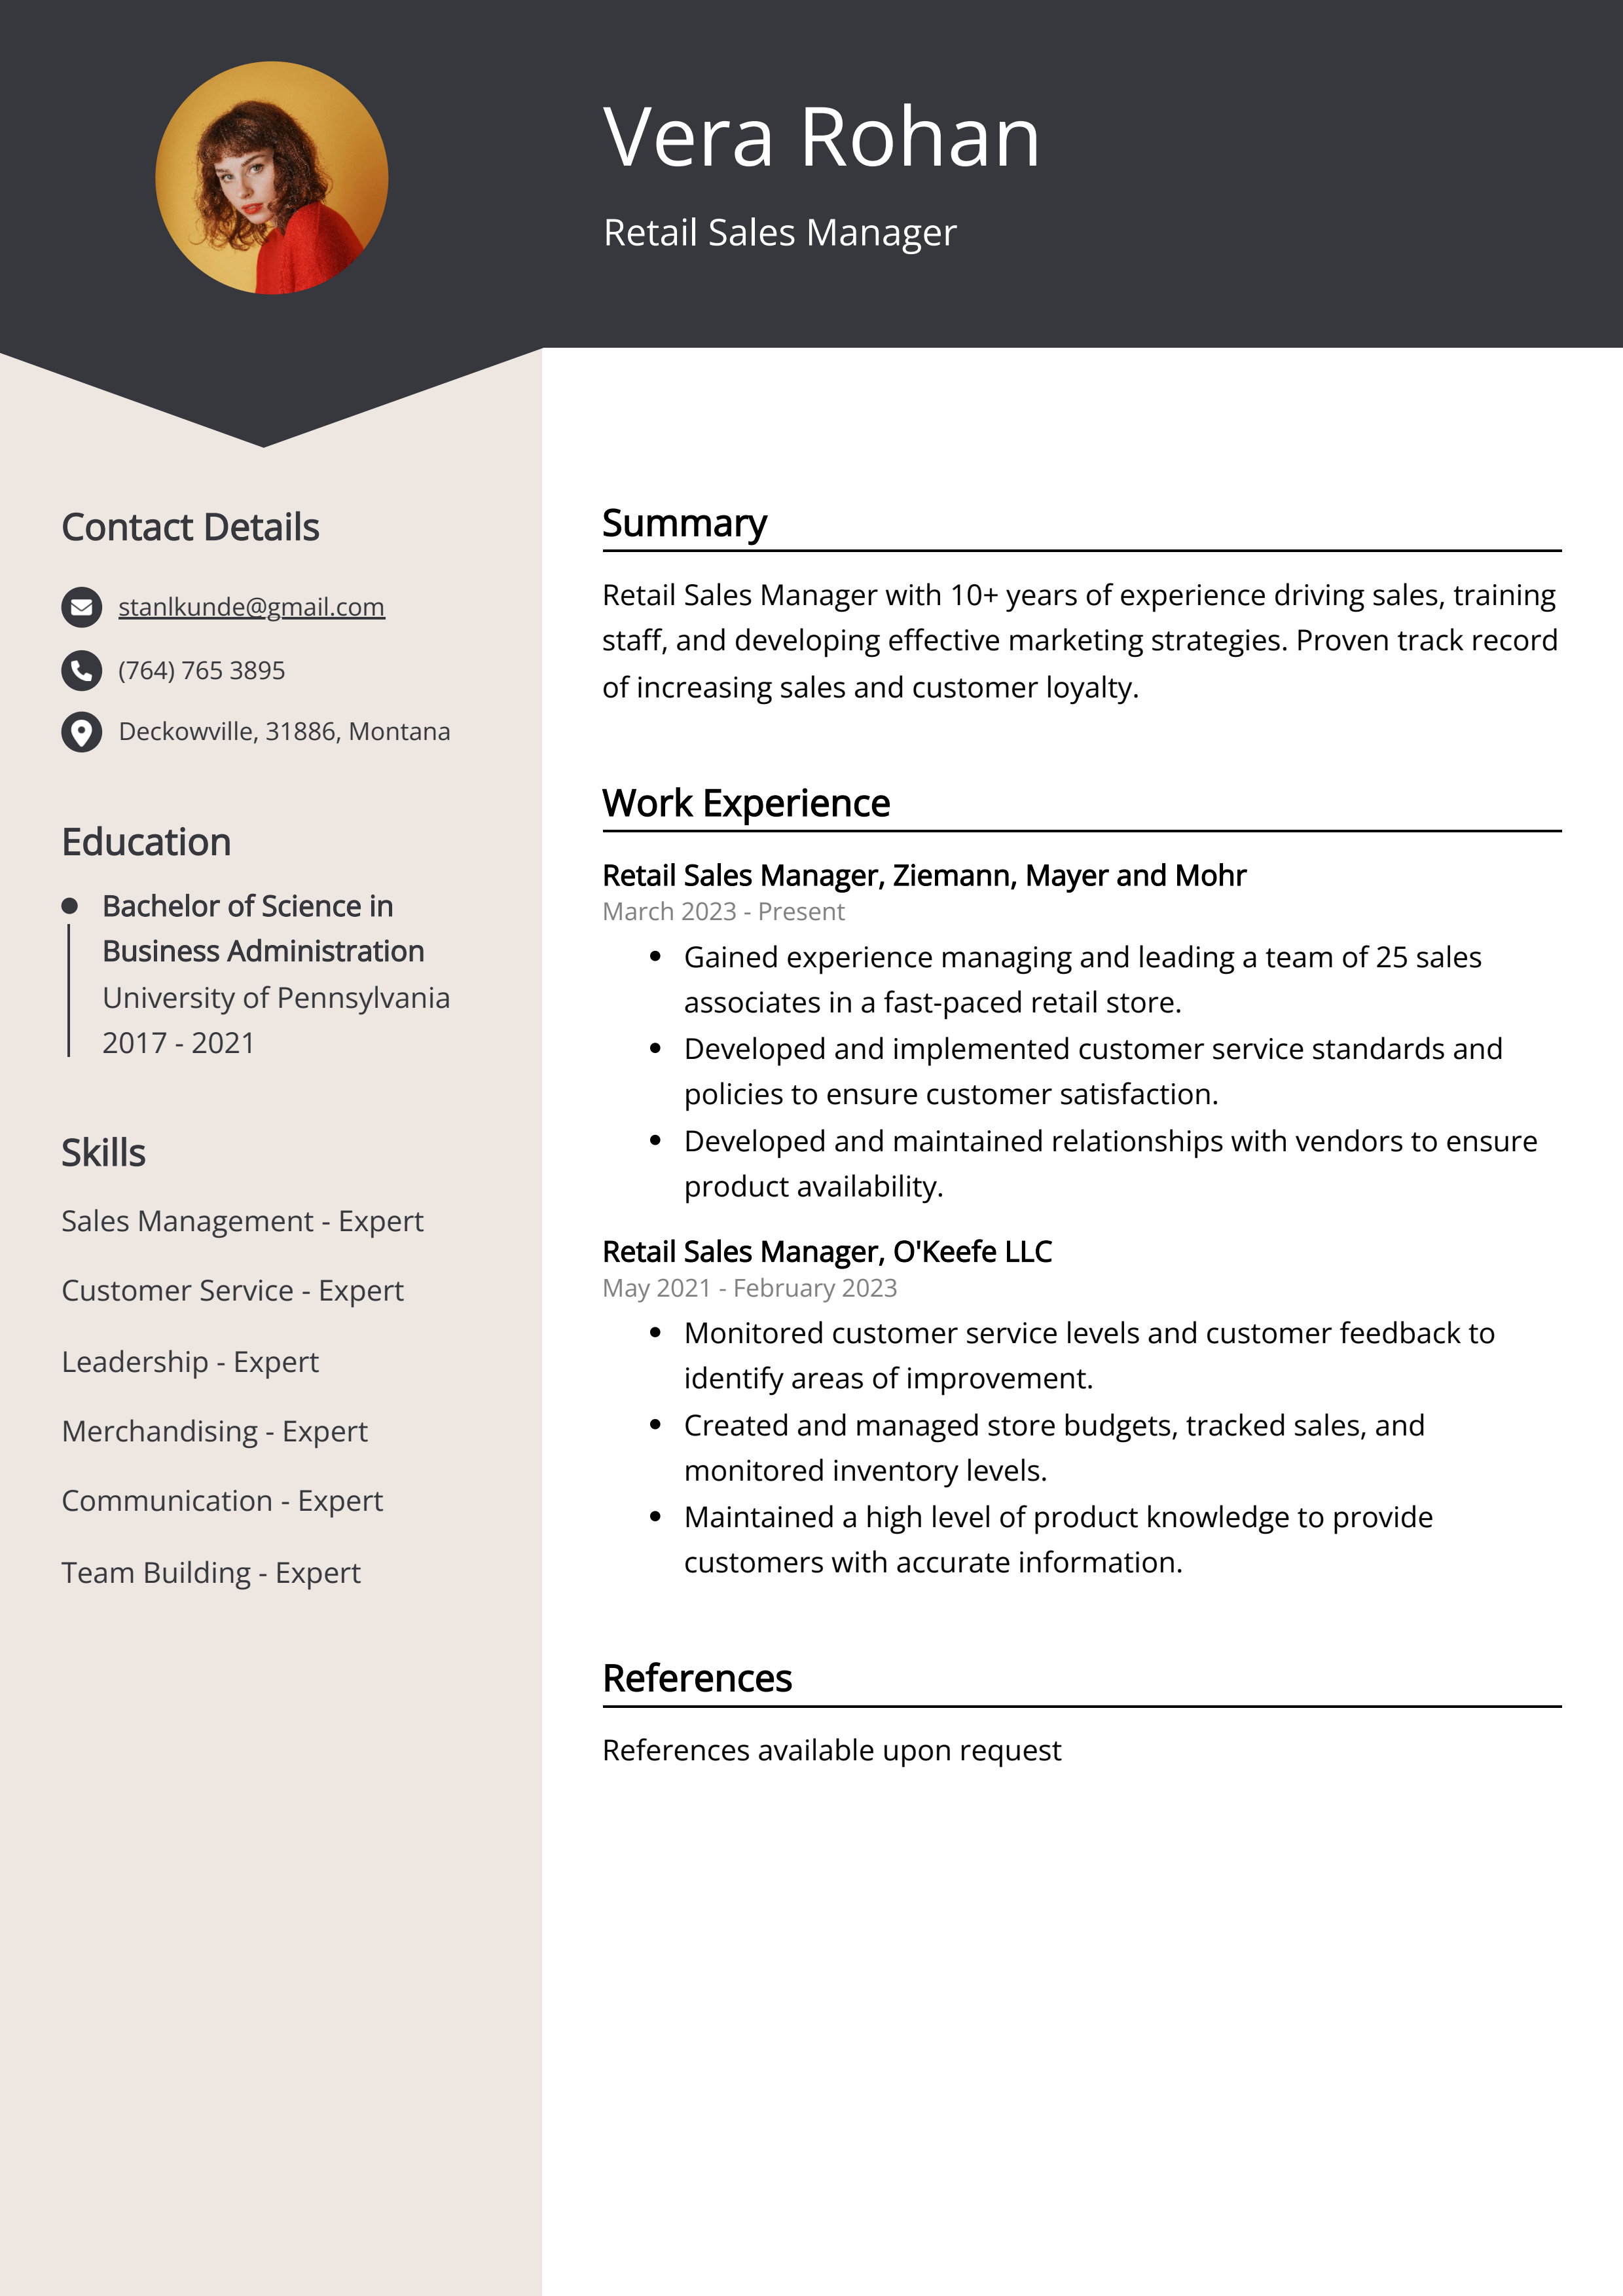 Retail Sales Manager CV Example